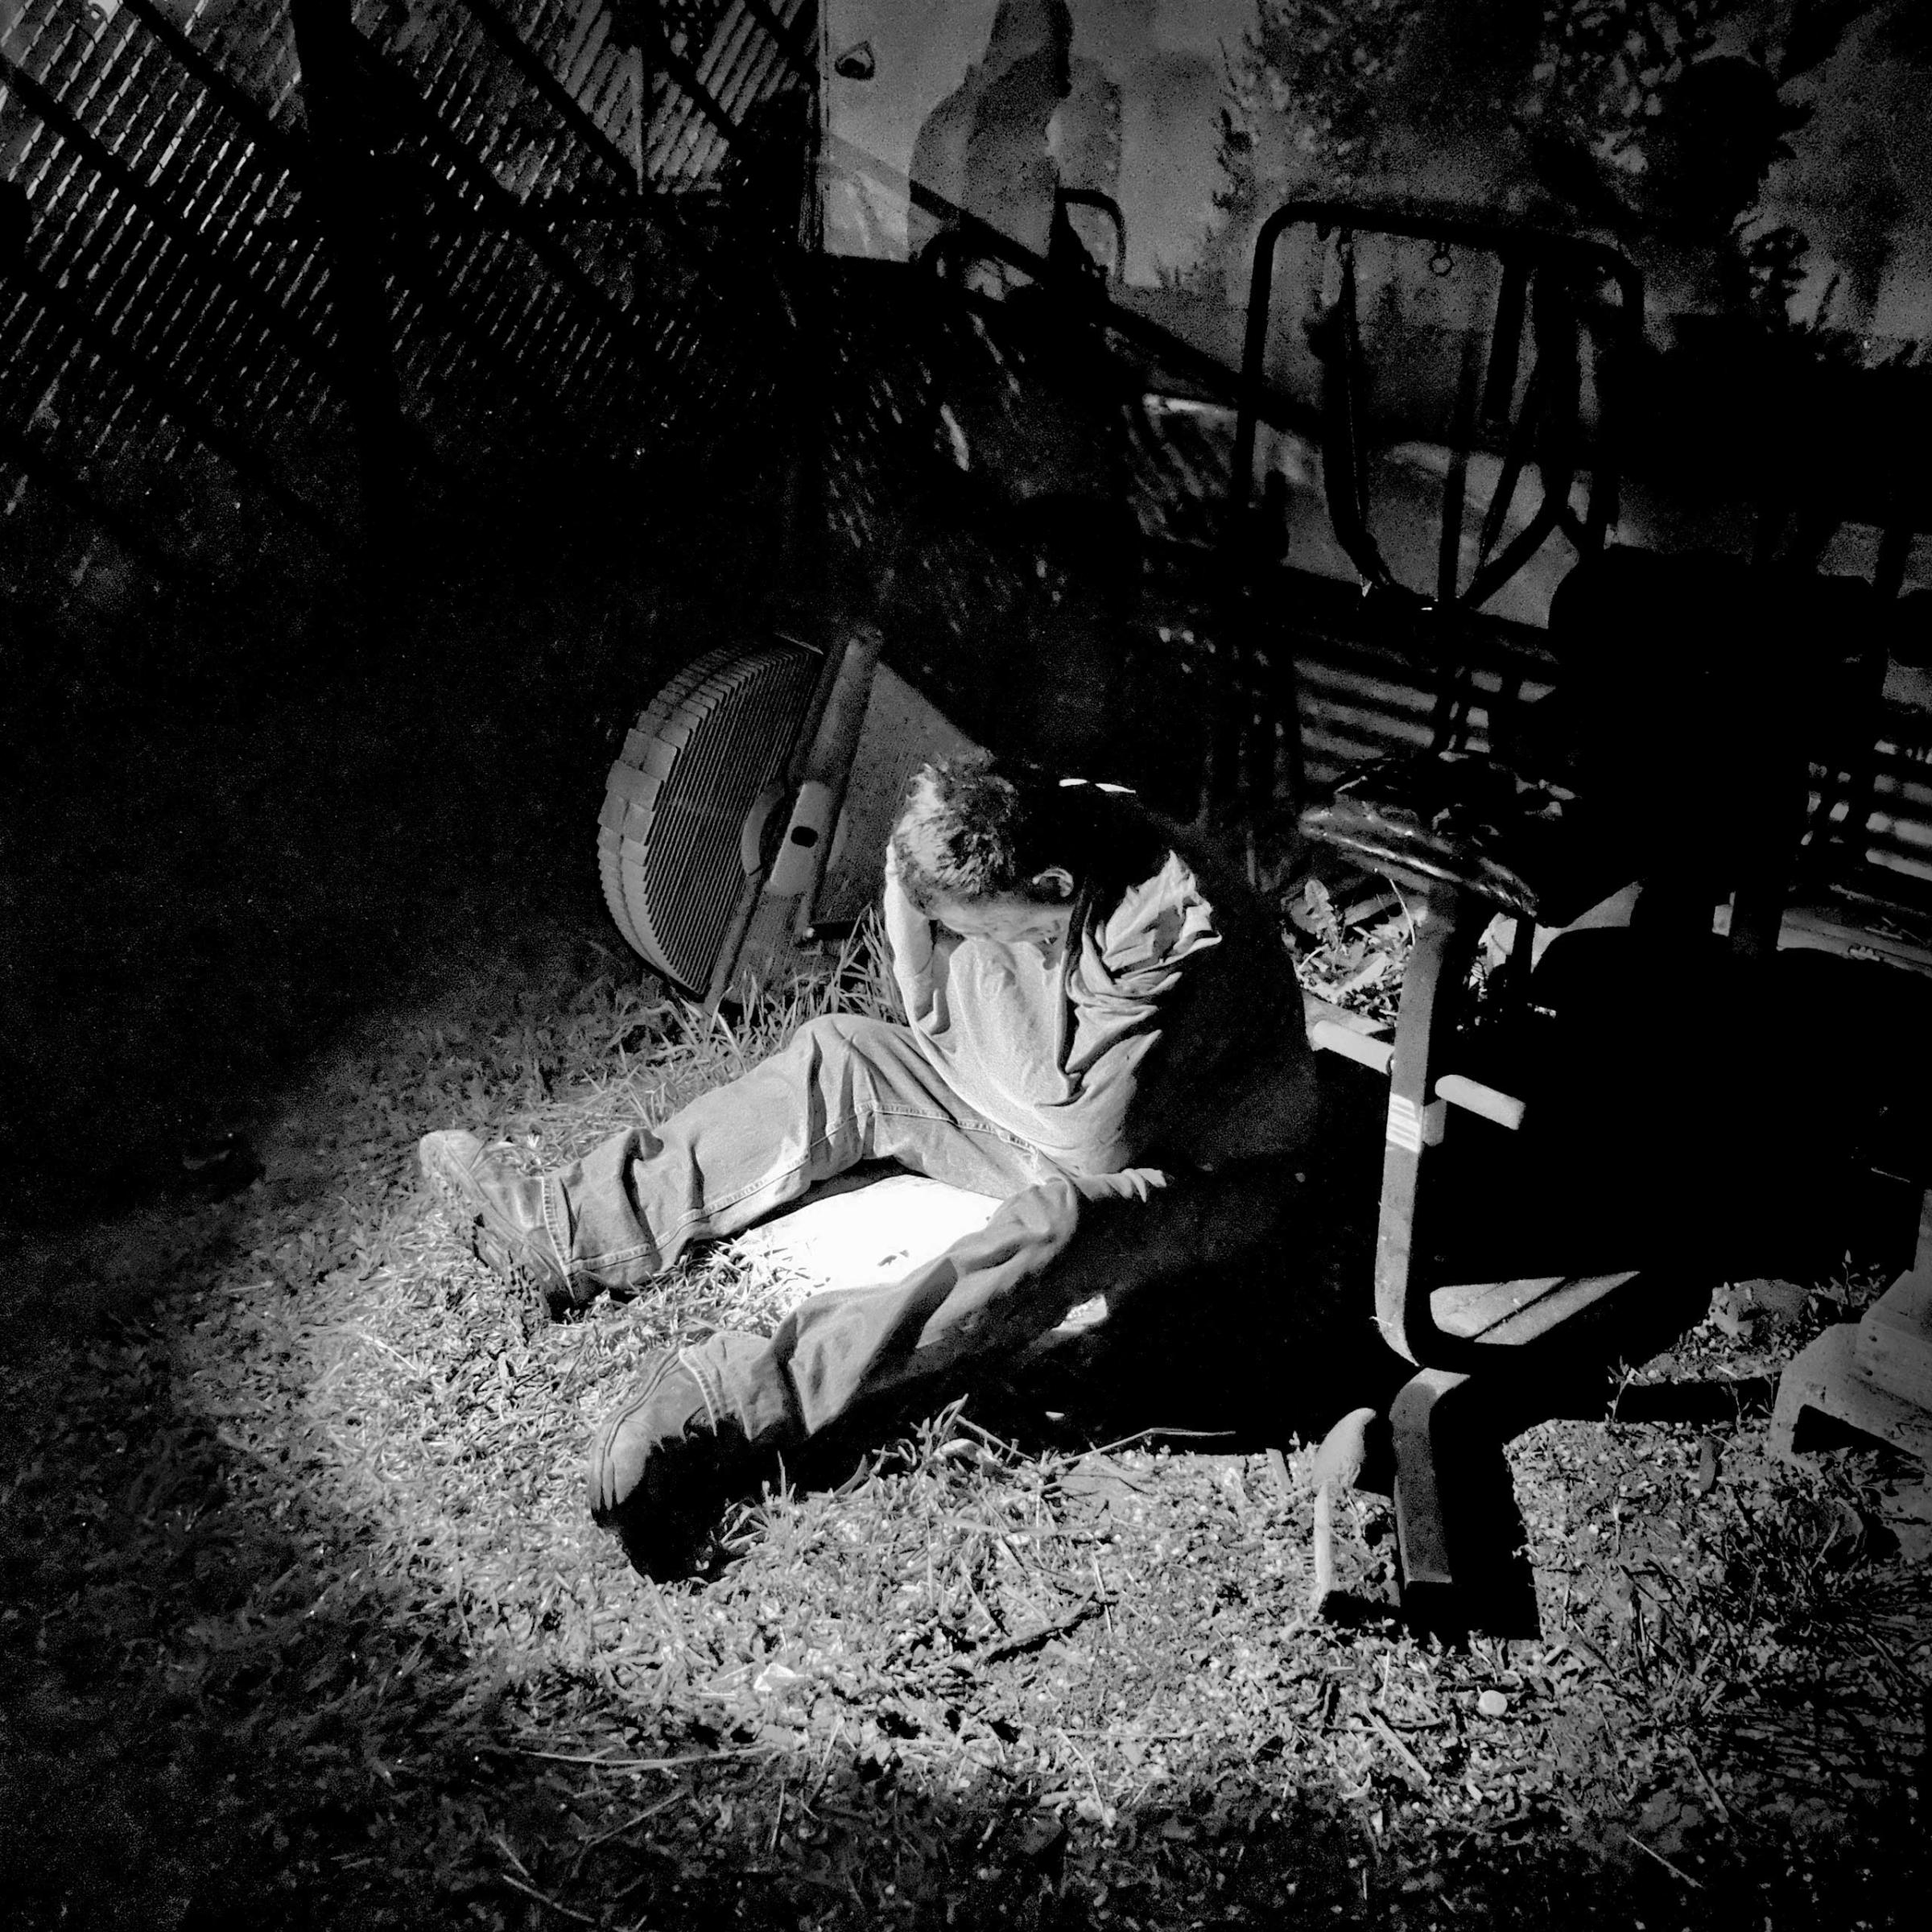 Gallup, NM.  A man sleeping next to a house was questioned by police.  Gallup is a city in McKinley County, New Mexico. The population is 21,678 and 21.9% live below the poverty level. Gallup has the highest violent crime rate in the state of New Mexico. In 2012, violent crime was nearly five times the national average. #geographyofpoverty